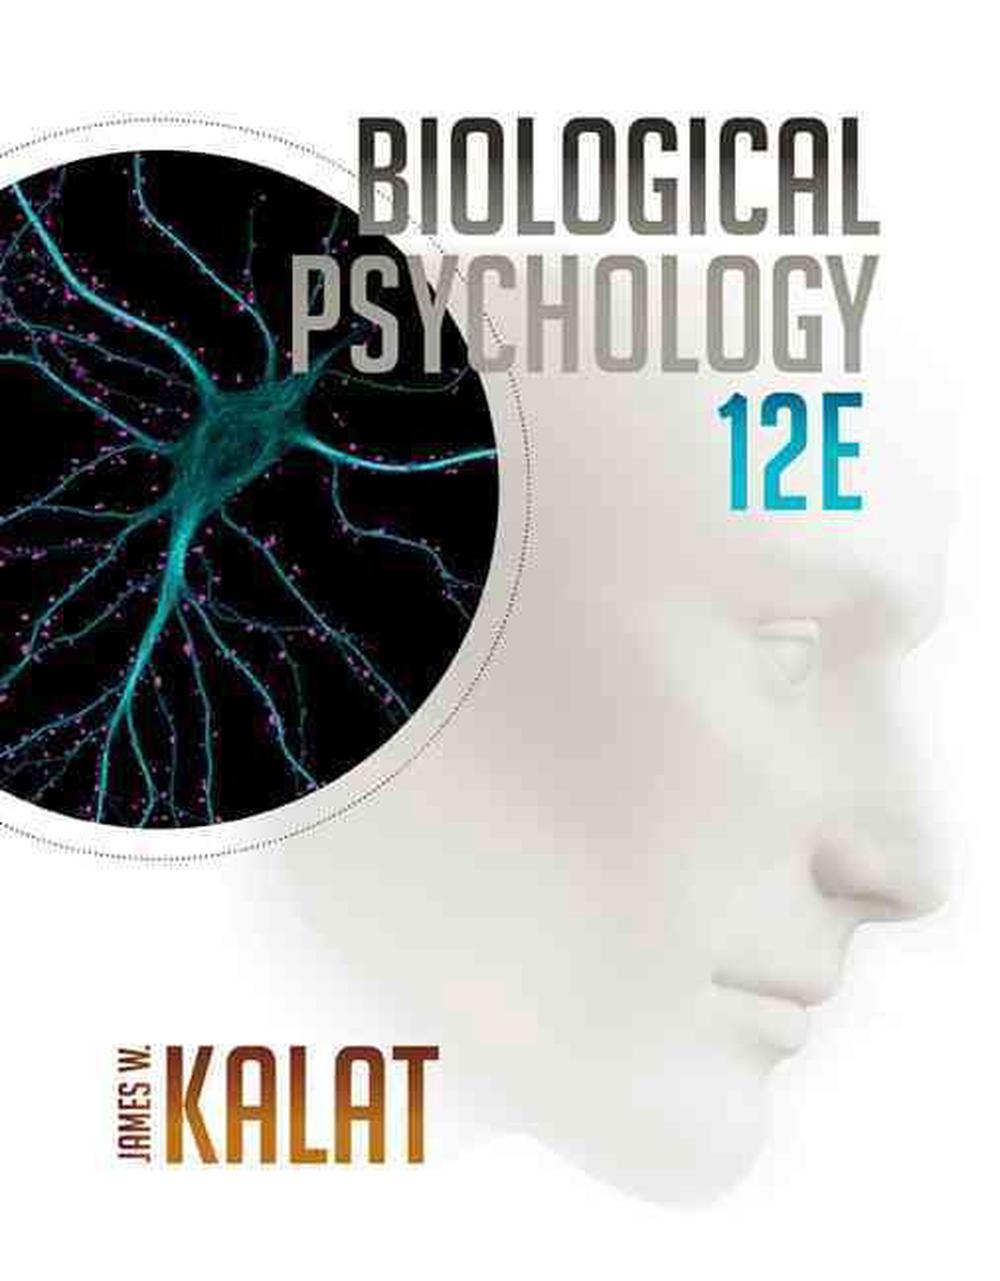 Biological Psychology, 12th Edition by James W. Kalat, Hardcover, 9781305105409 | Buy online at ...